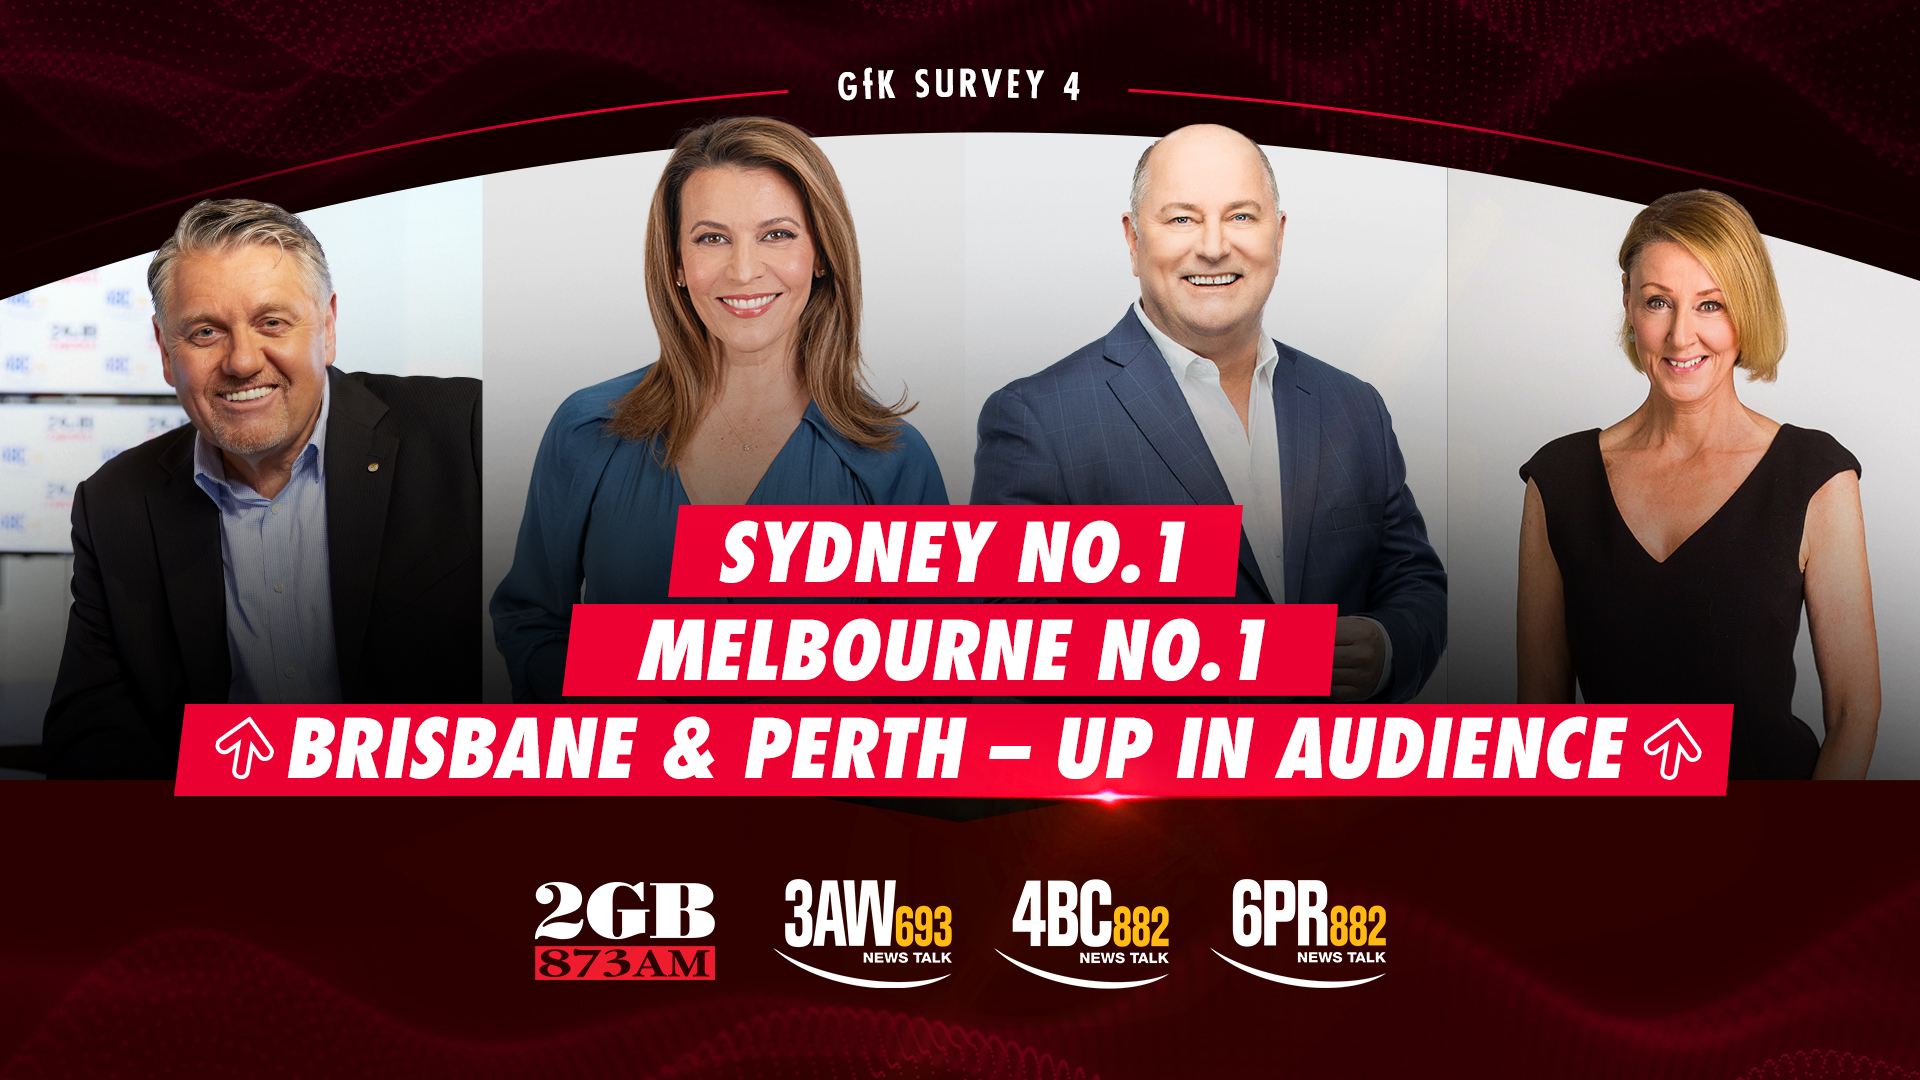 THE RECORDS KEEP TUMBLING: BEST EVER SURVEY 4 FOR NINE'S RADIO STATIONS